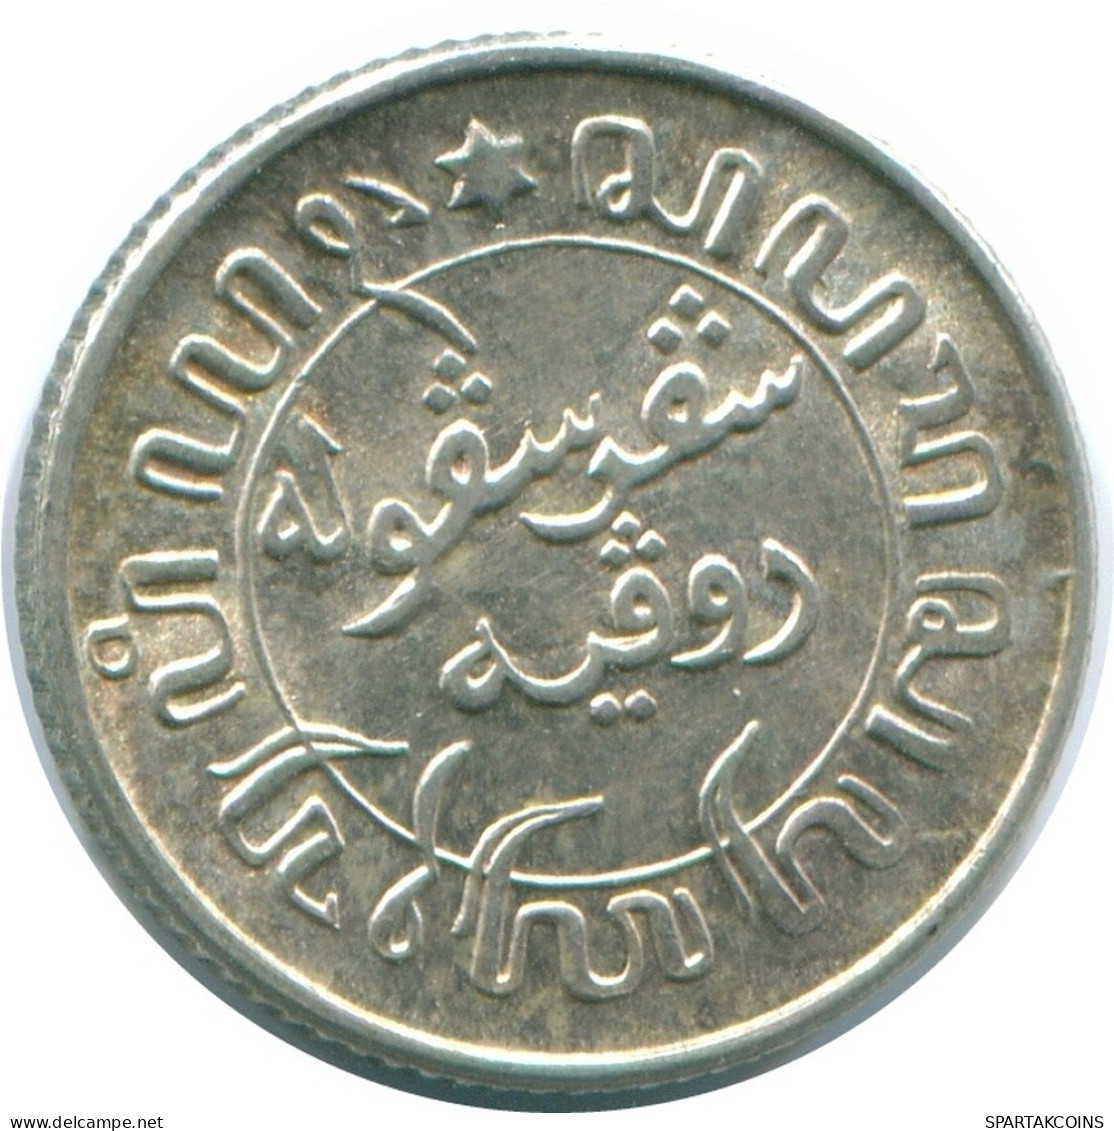 1/10 GULDEN 1945 P NETHERLANDS EAST INDIES SILVER Colonial Coin #NL14230.3.U.A - Dutch East Indies